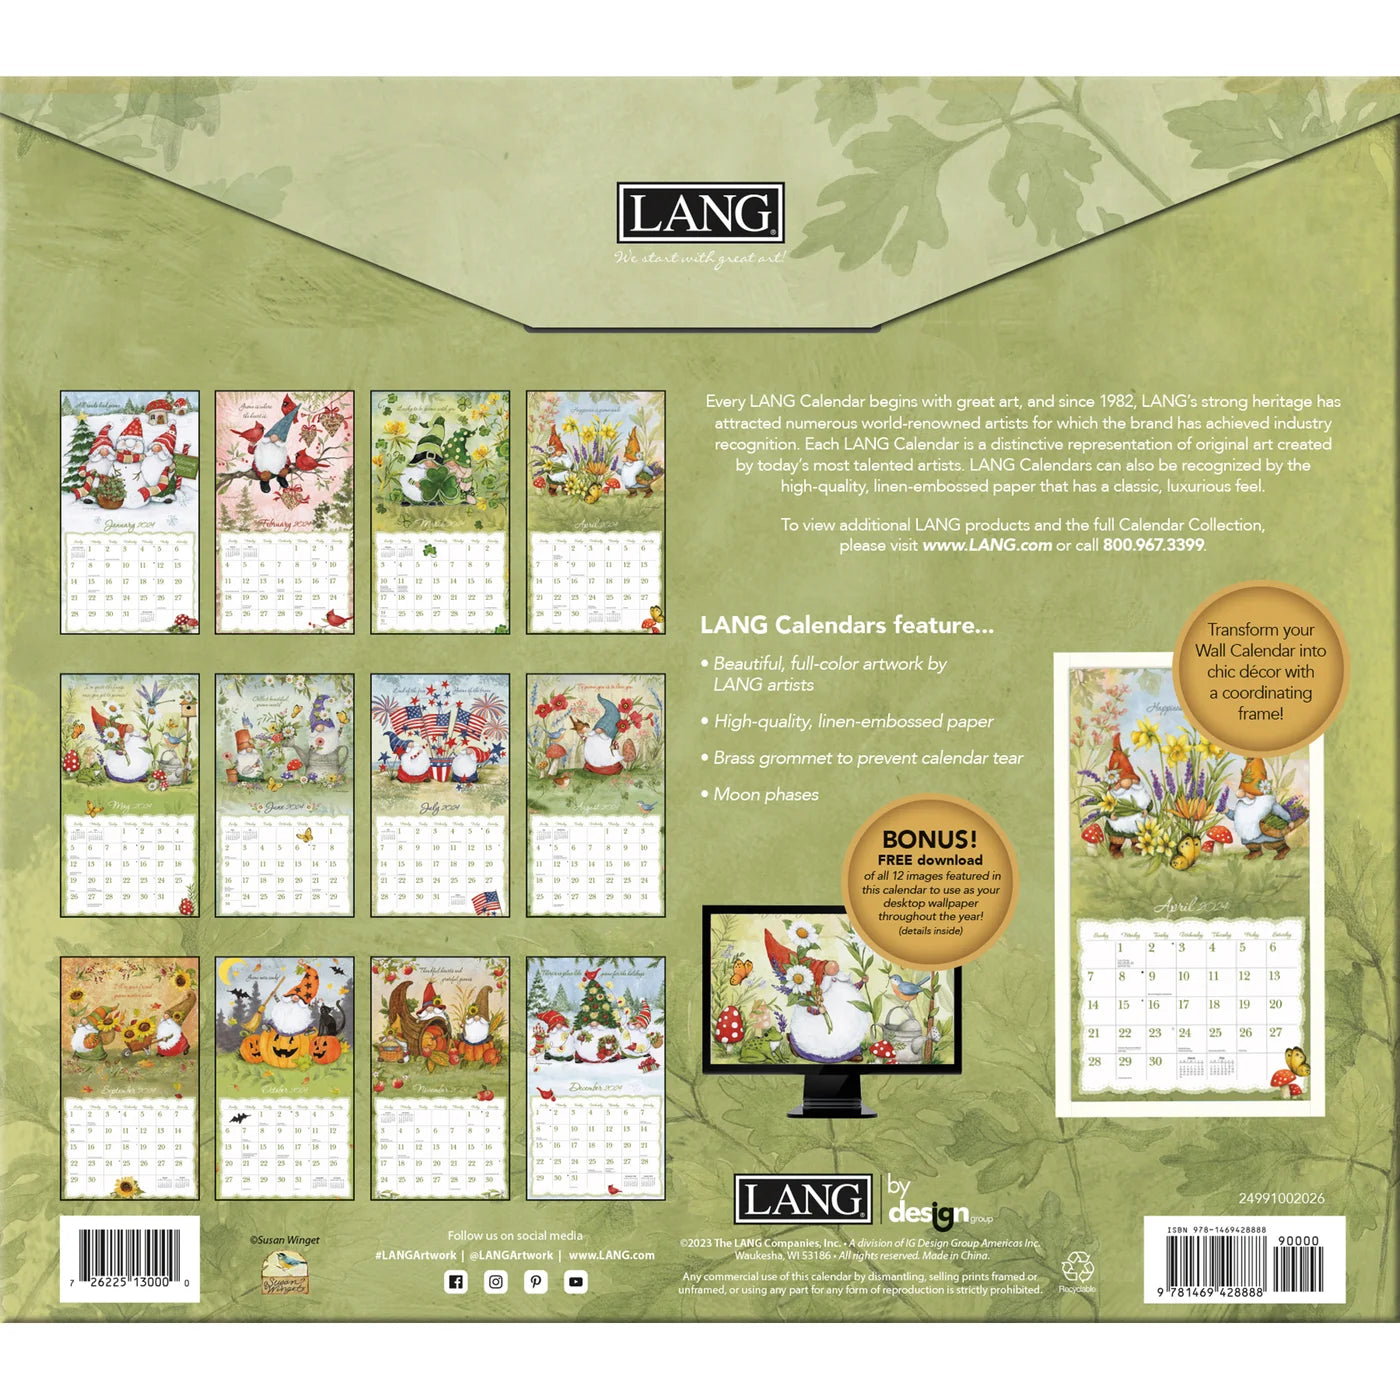 2024 LANG Gnome Sweet Gnome By Susan Winget - Deluxe Wall Calendar